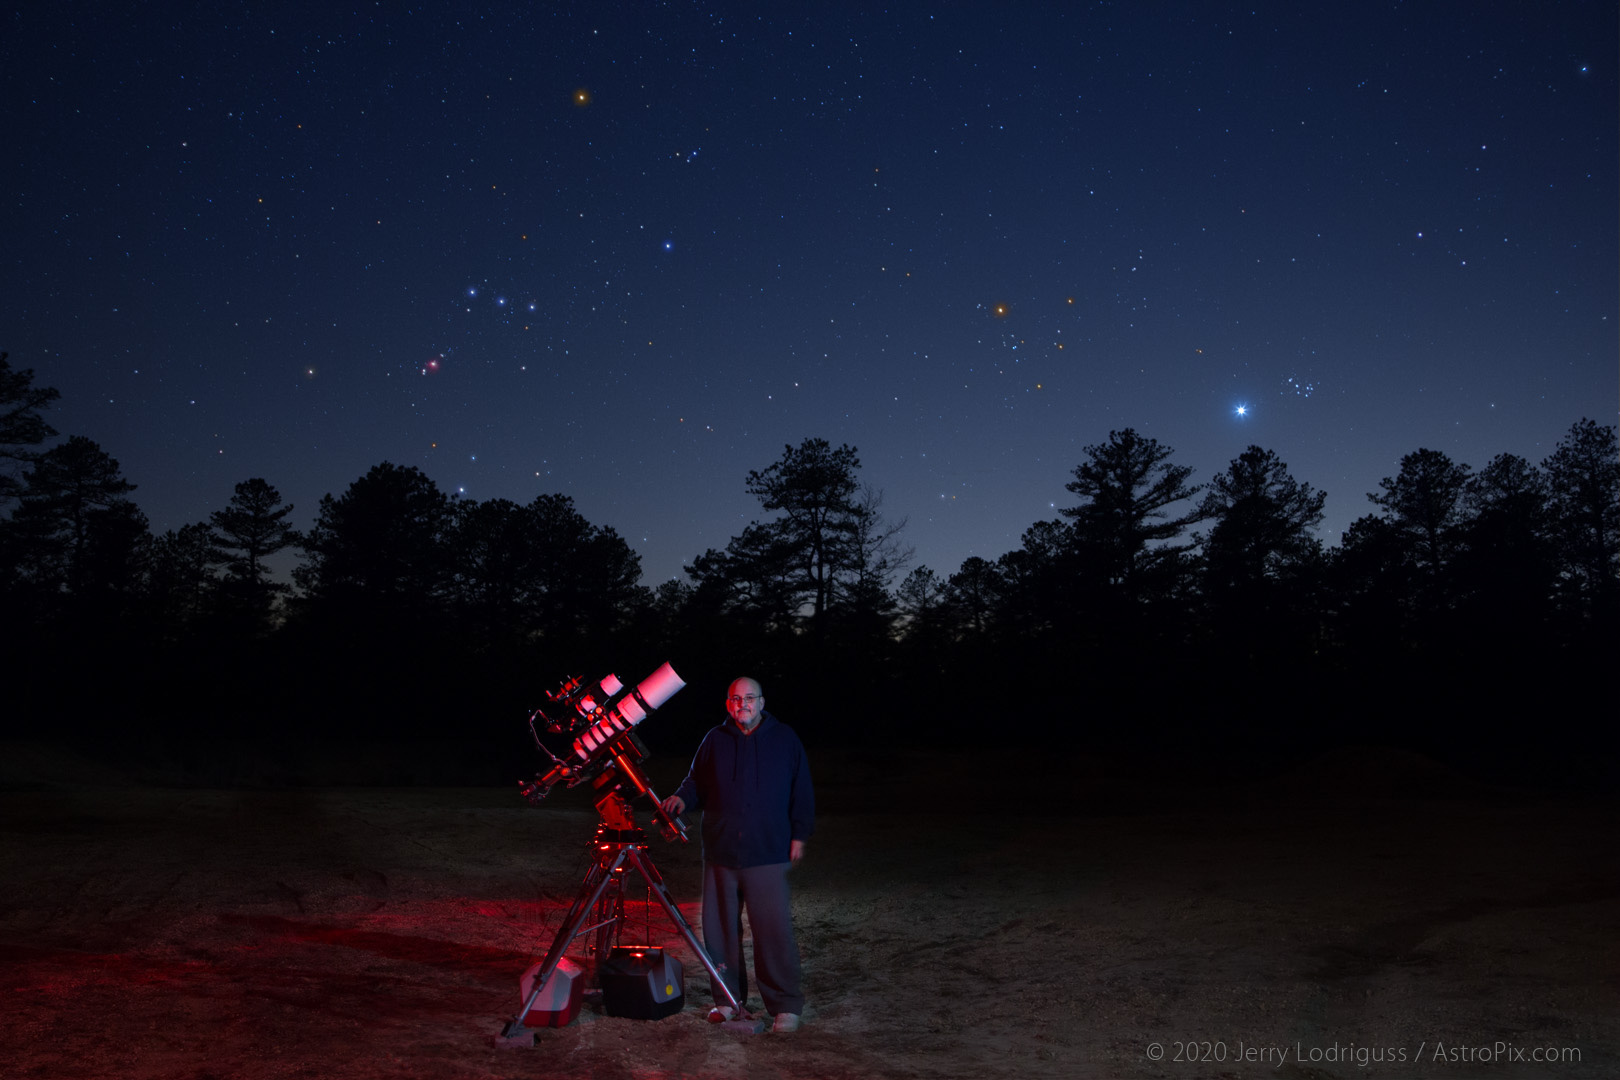 Self-portrait by Jerry Lodriguss with Orion, the Hyades, Venus, and the Pleiades setting in the west.